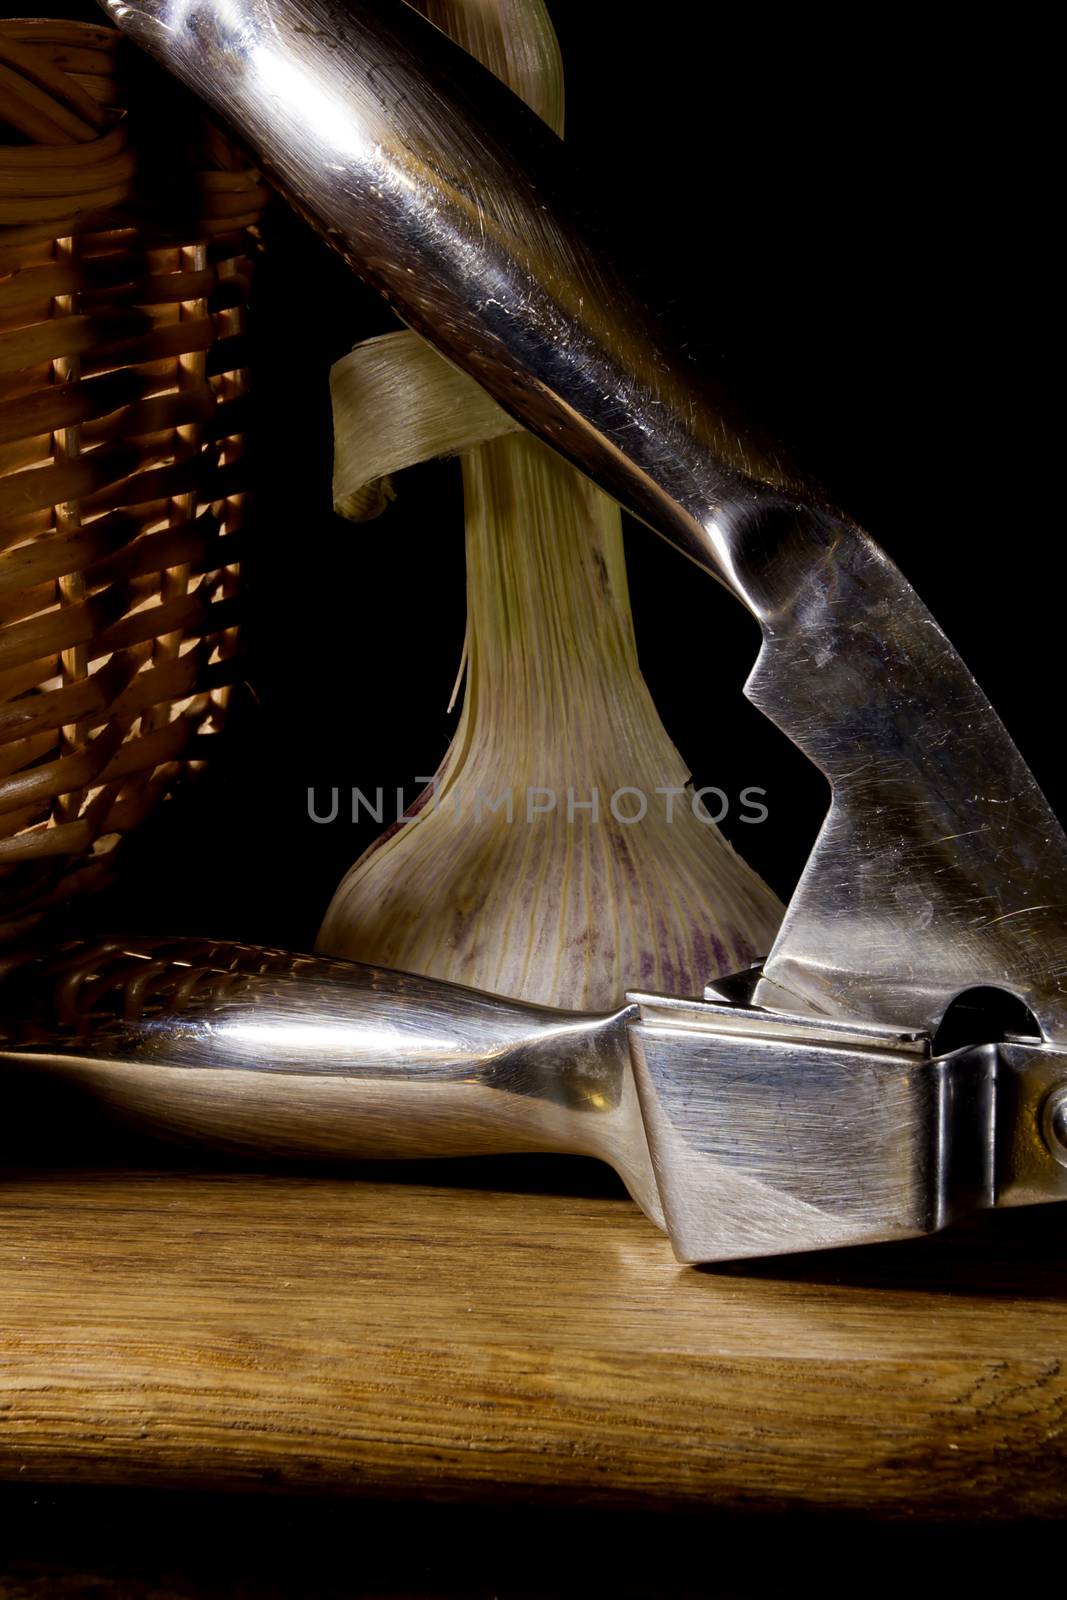 Garlic press and cloves of garlic laid on a wooden table background